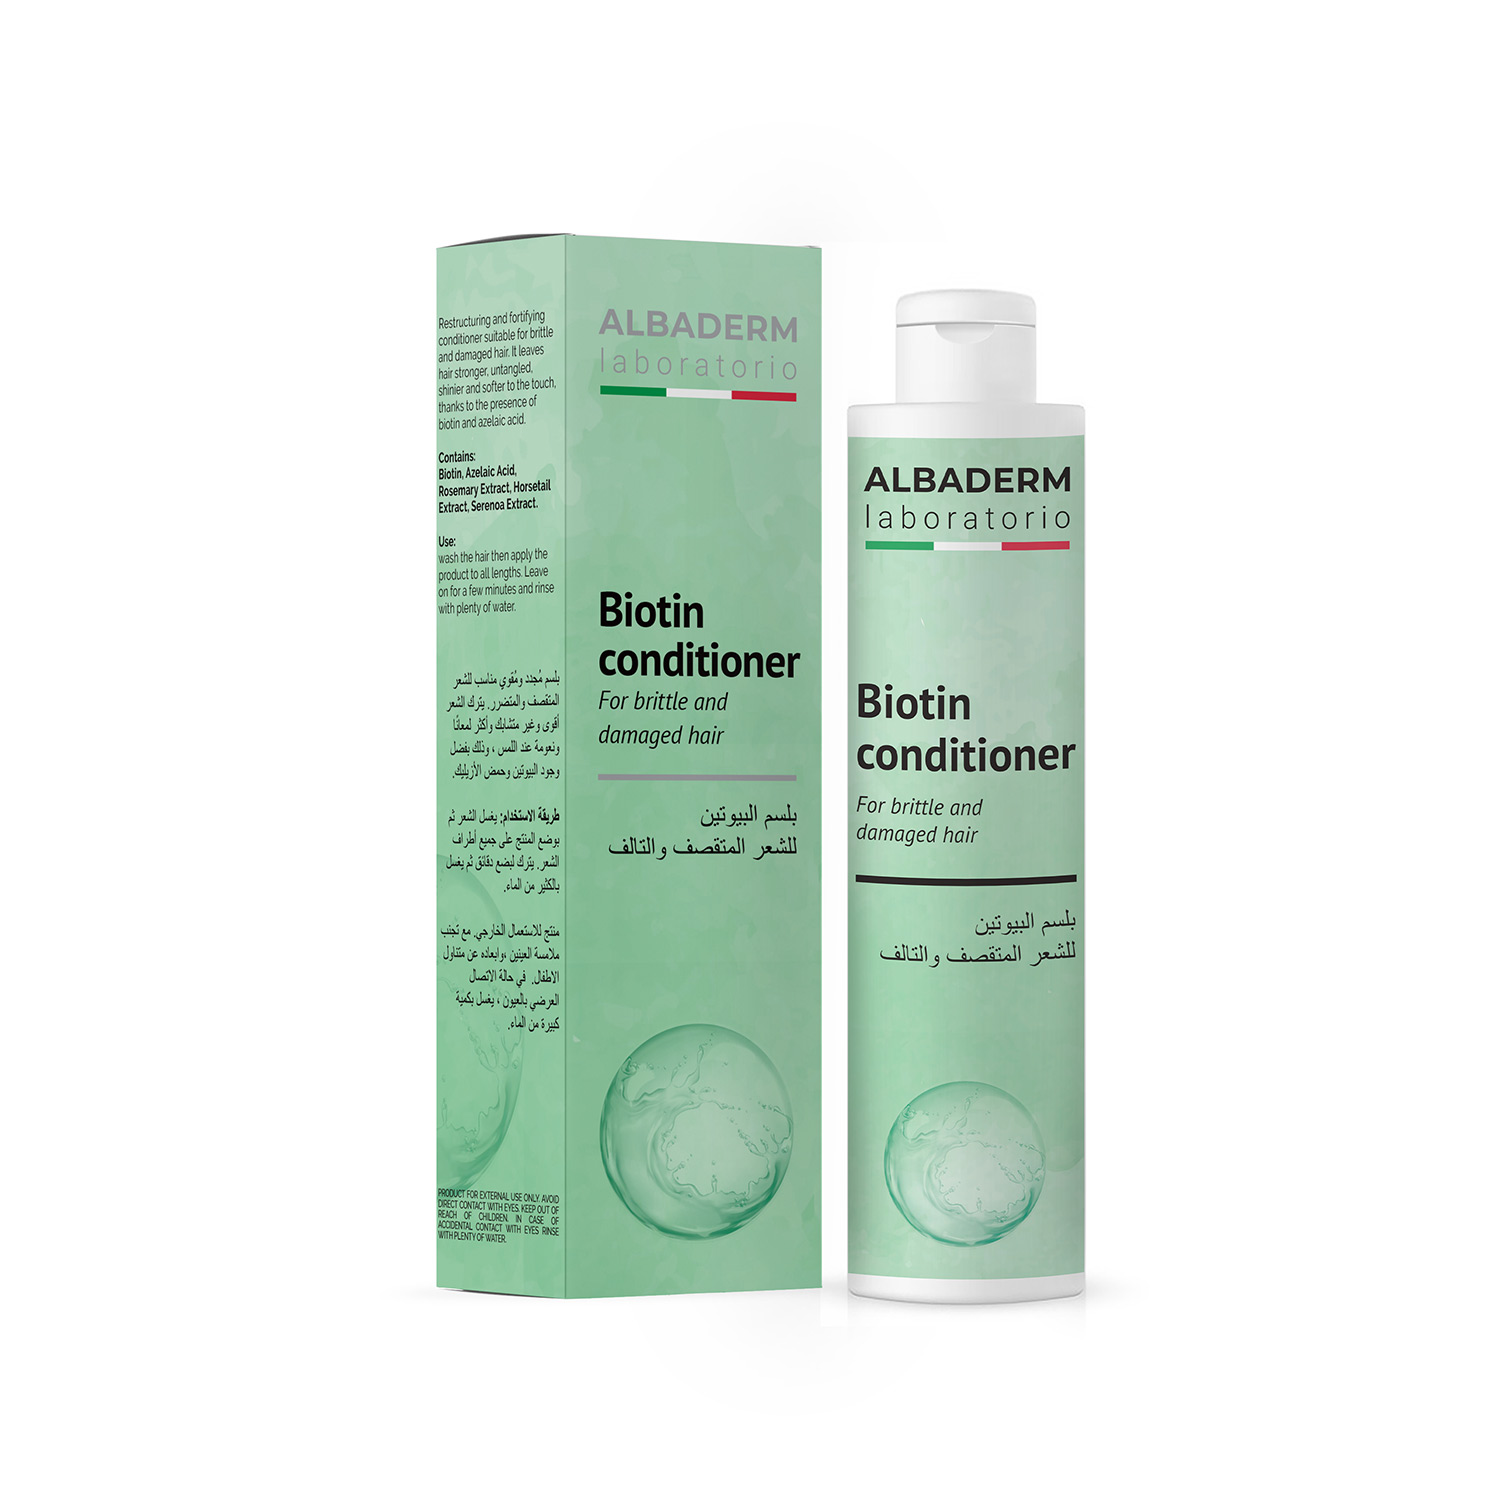 Biotin conditioner For brittle and damaged hair